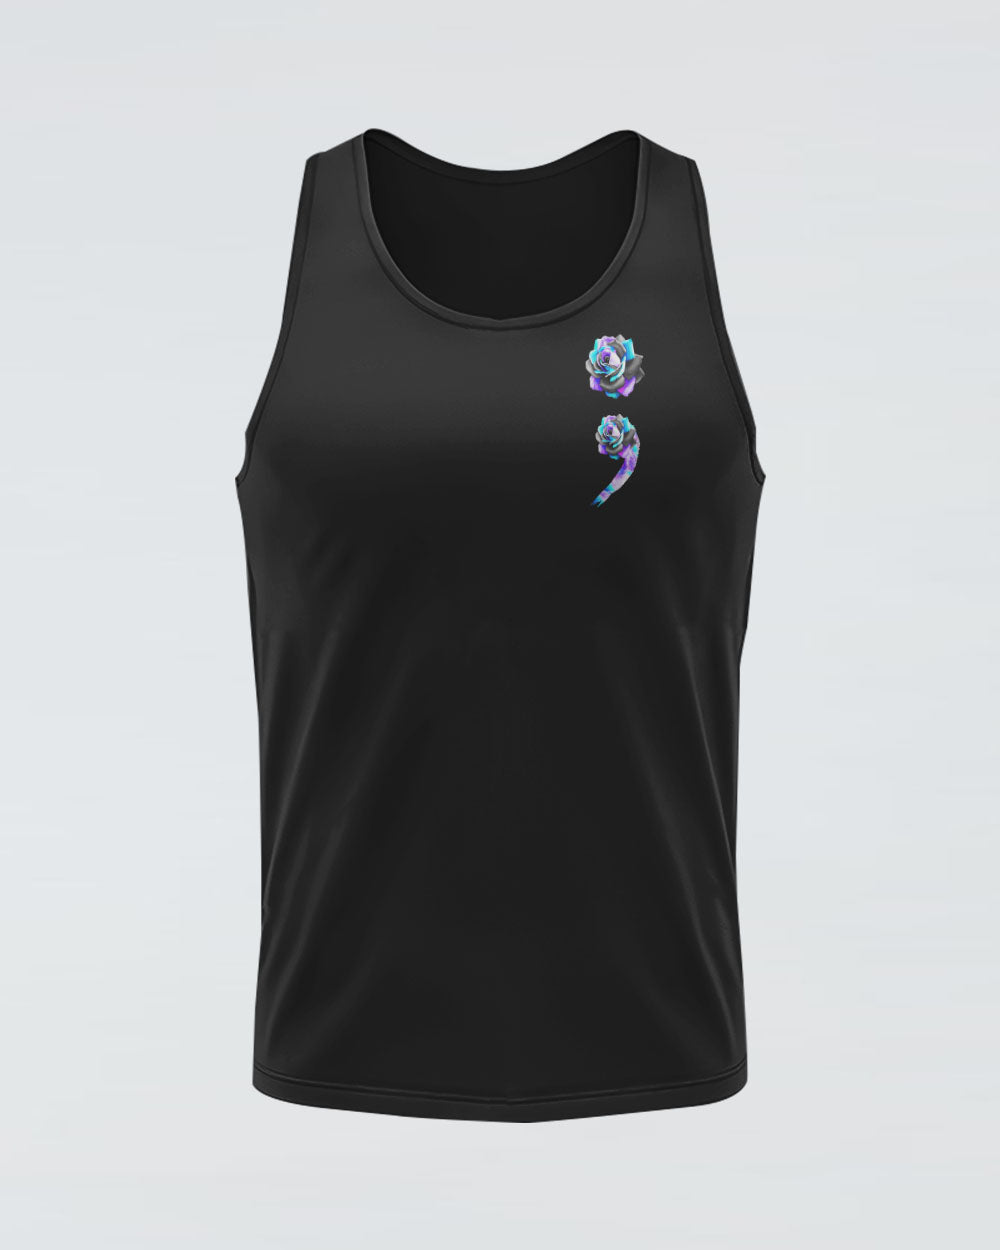 Choose To Keep Going Rose Women's Suicide Prevention Awareness Tanks